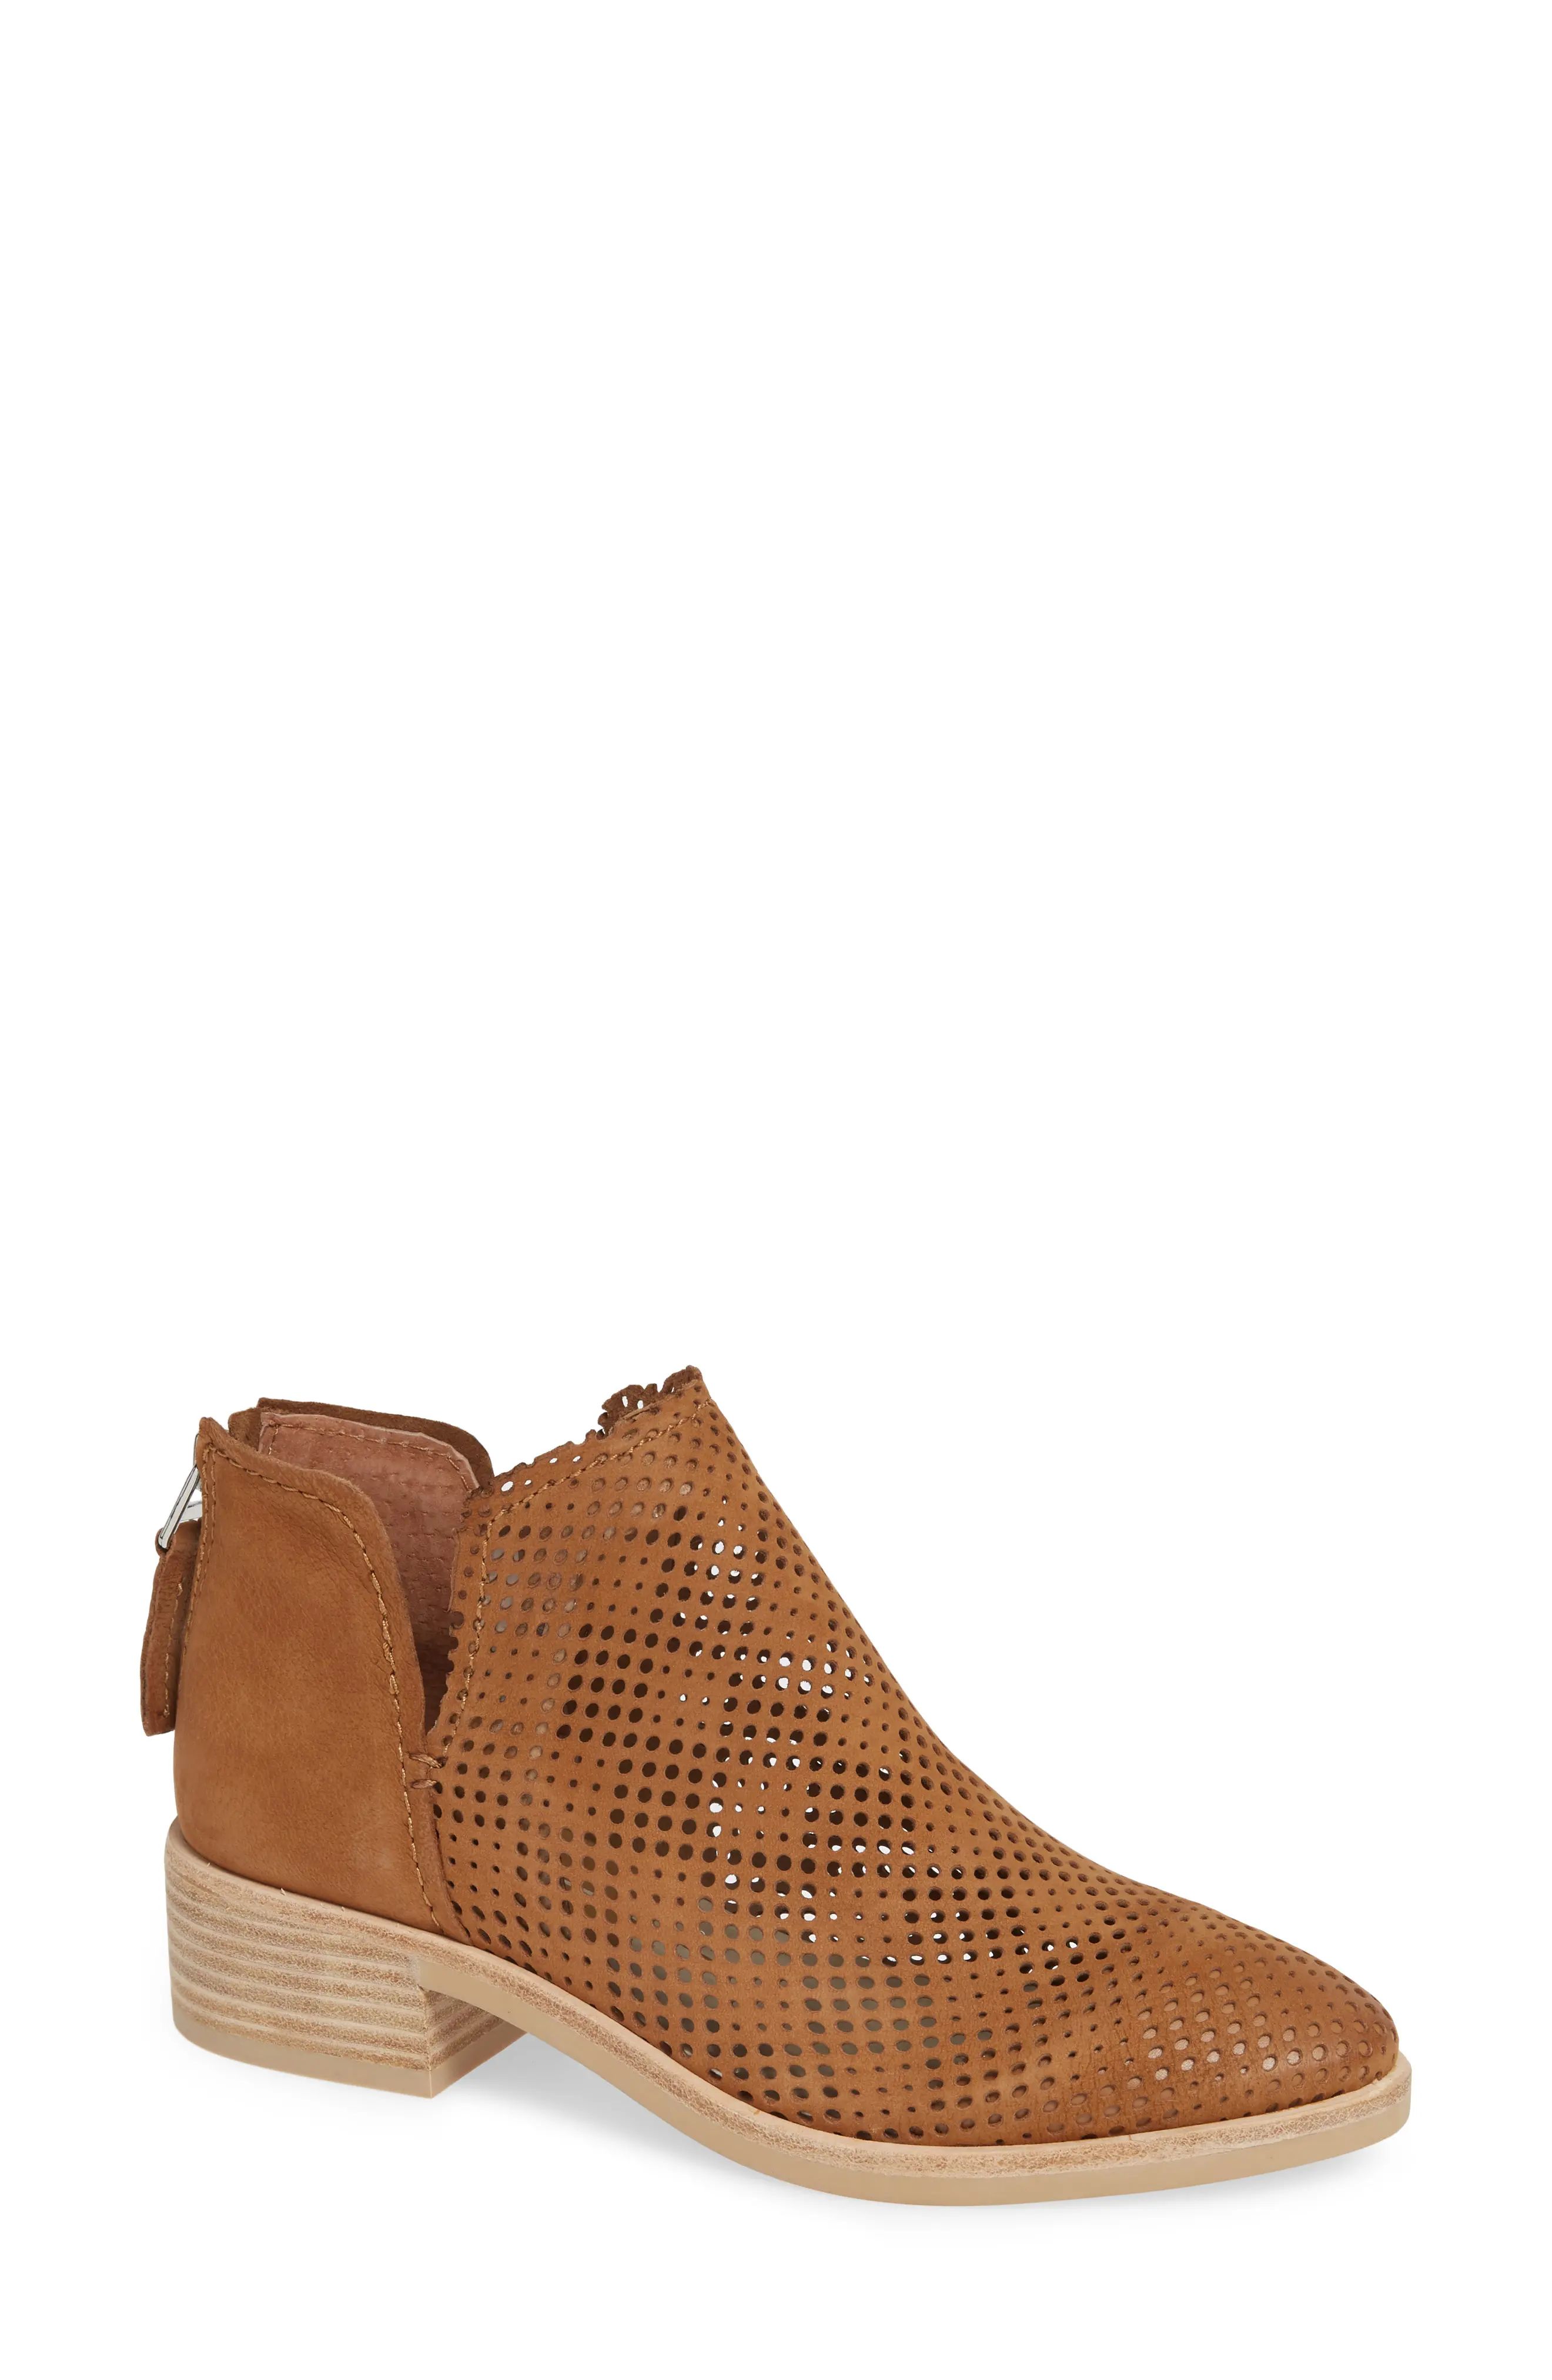 Dolce Vita Tauris Perforated Bootie (Women) | Nordstrom